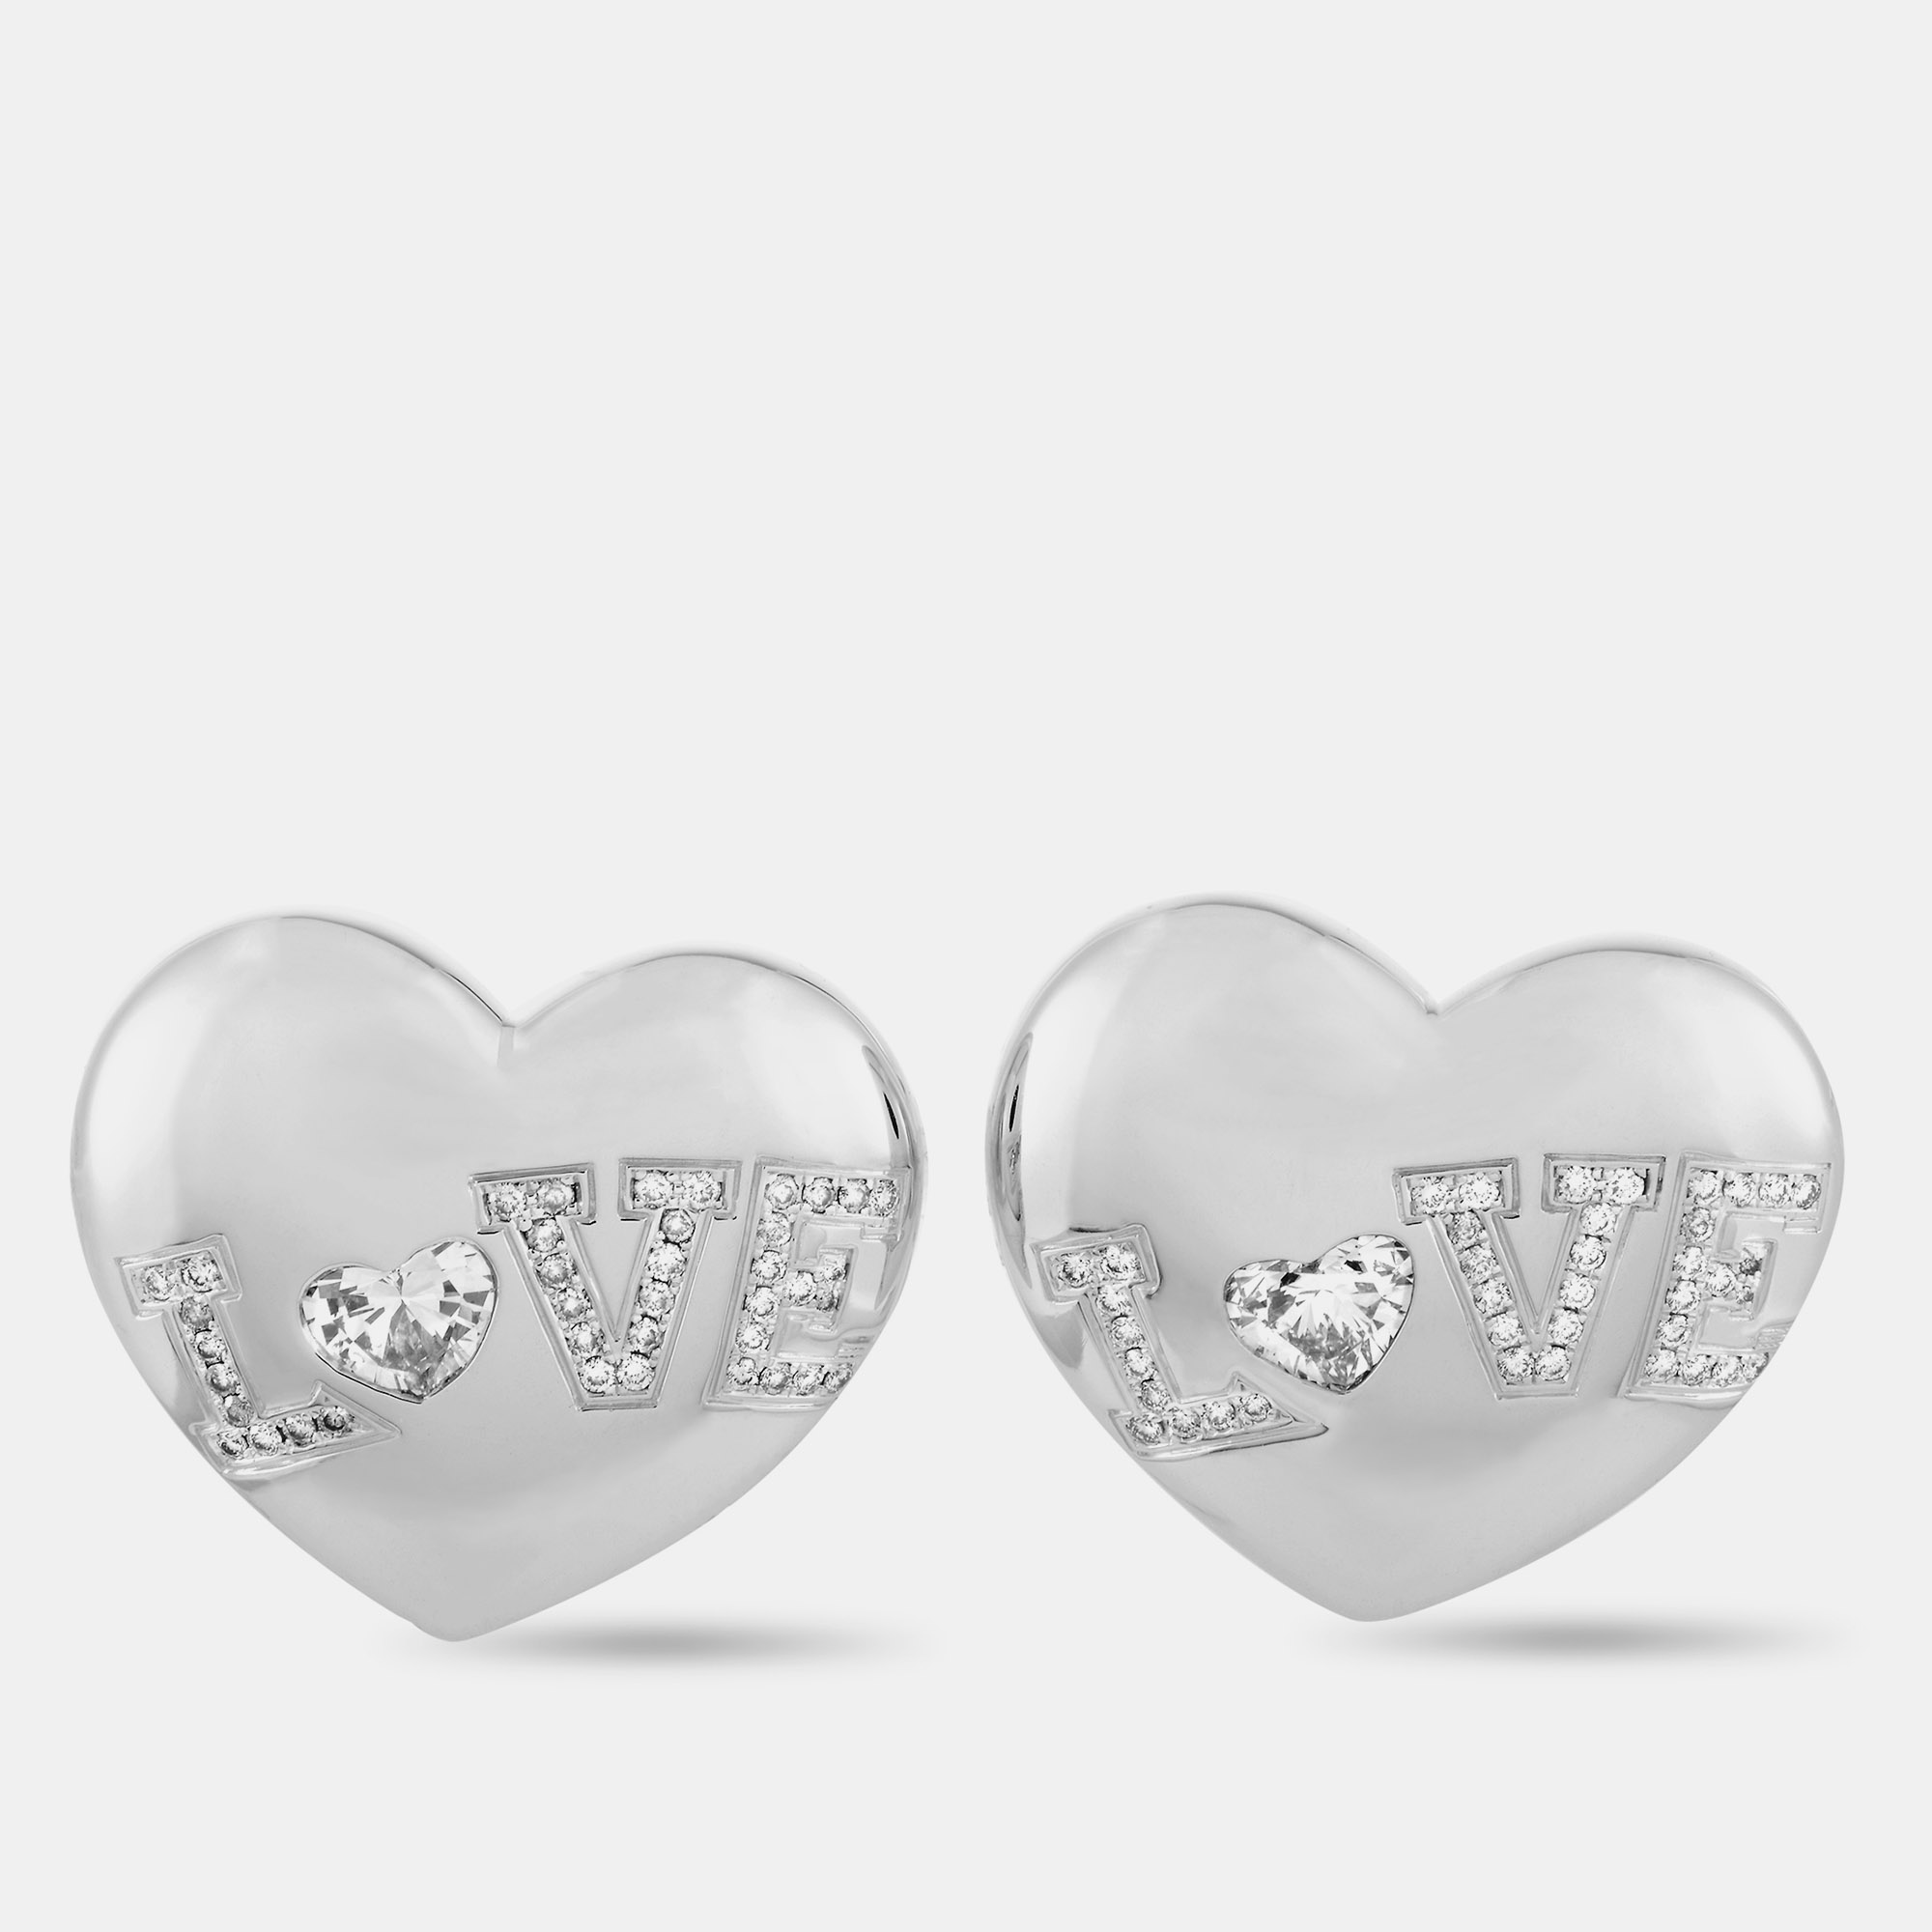 These Chopard earrings are crafted from 18K white gold and set with a total of 1.44 carats of diamonds that feature F G color and IF VVS clarity (the two heartshape stones total 1.03 carats and the remaining stones amount to 0.41 carats). The earrings measure 0.88 in length and 1 in width and each of the two weighs 13.45 grams.